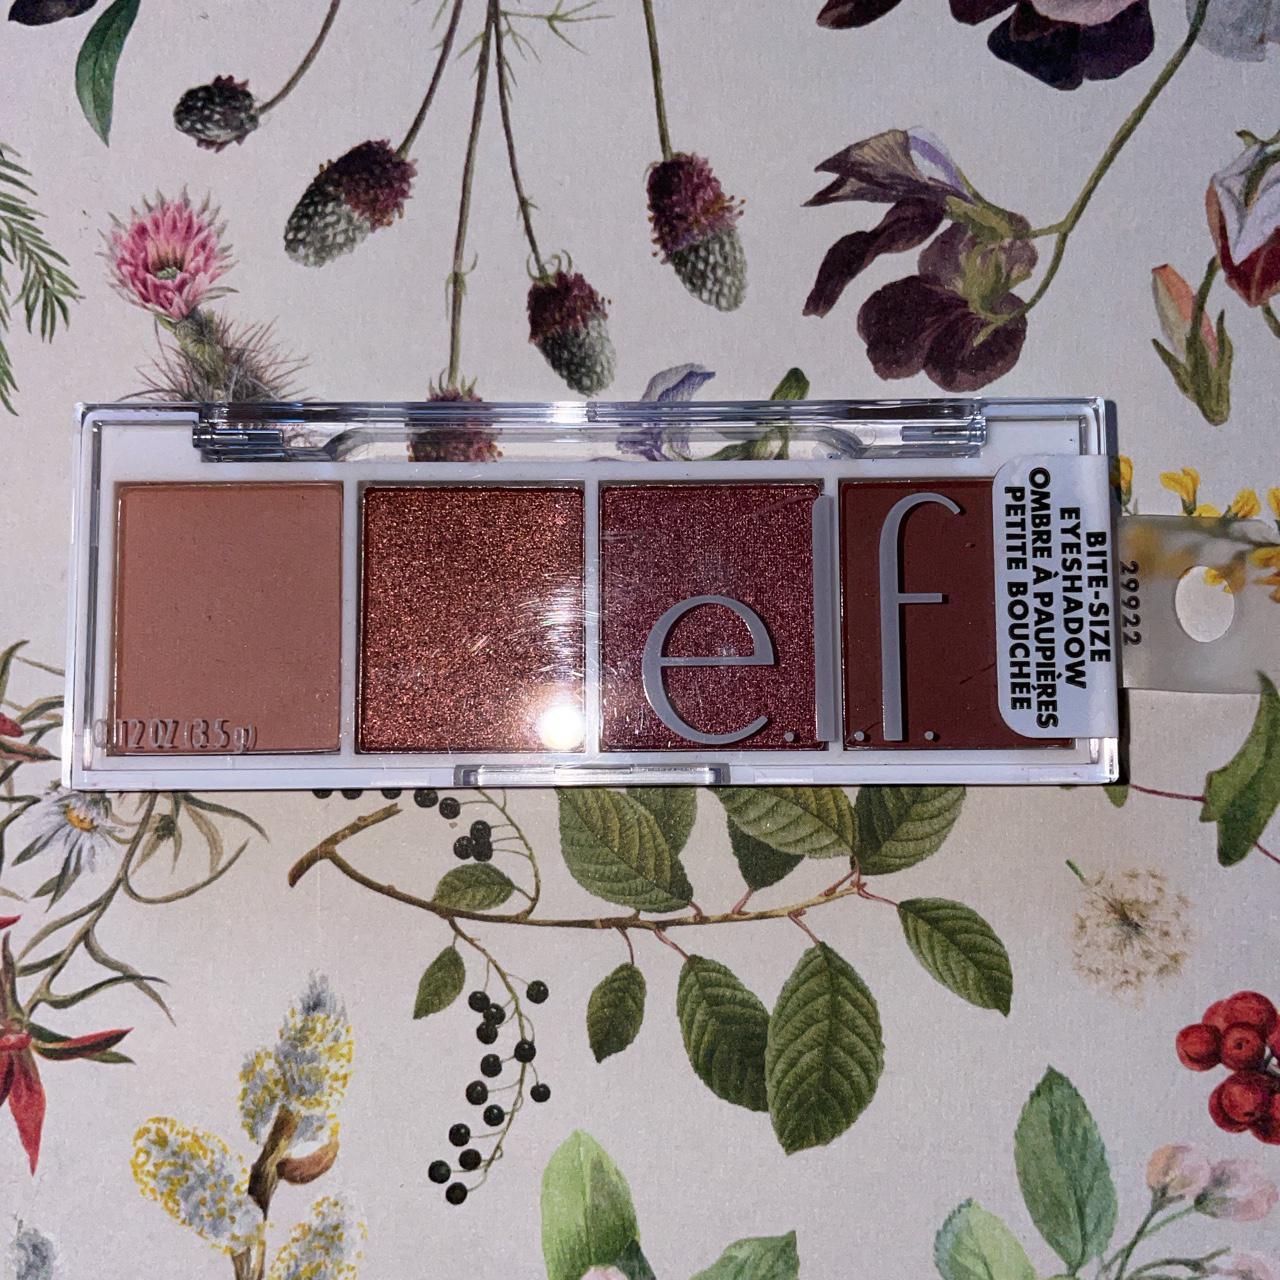 Product Image 1 - Mini eyeshadow palette from Elf.